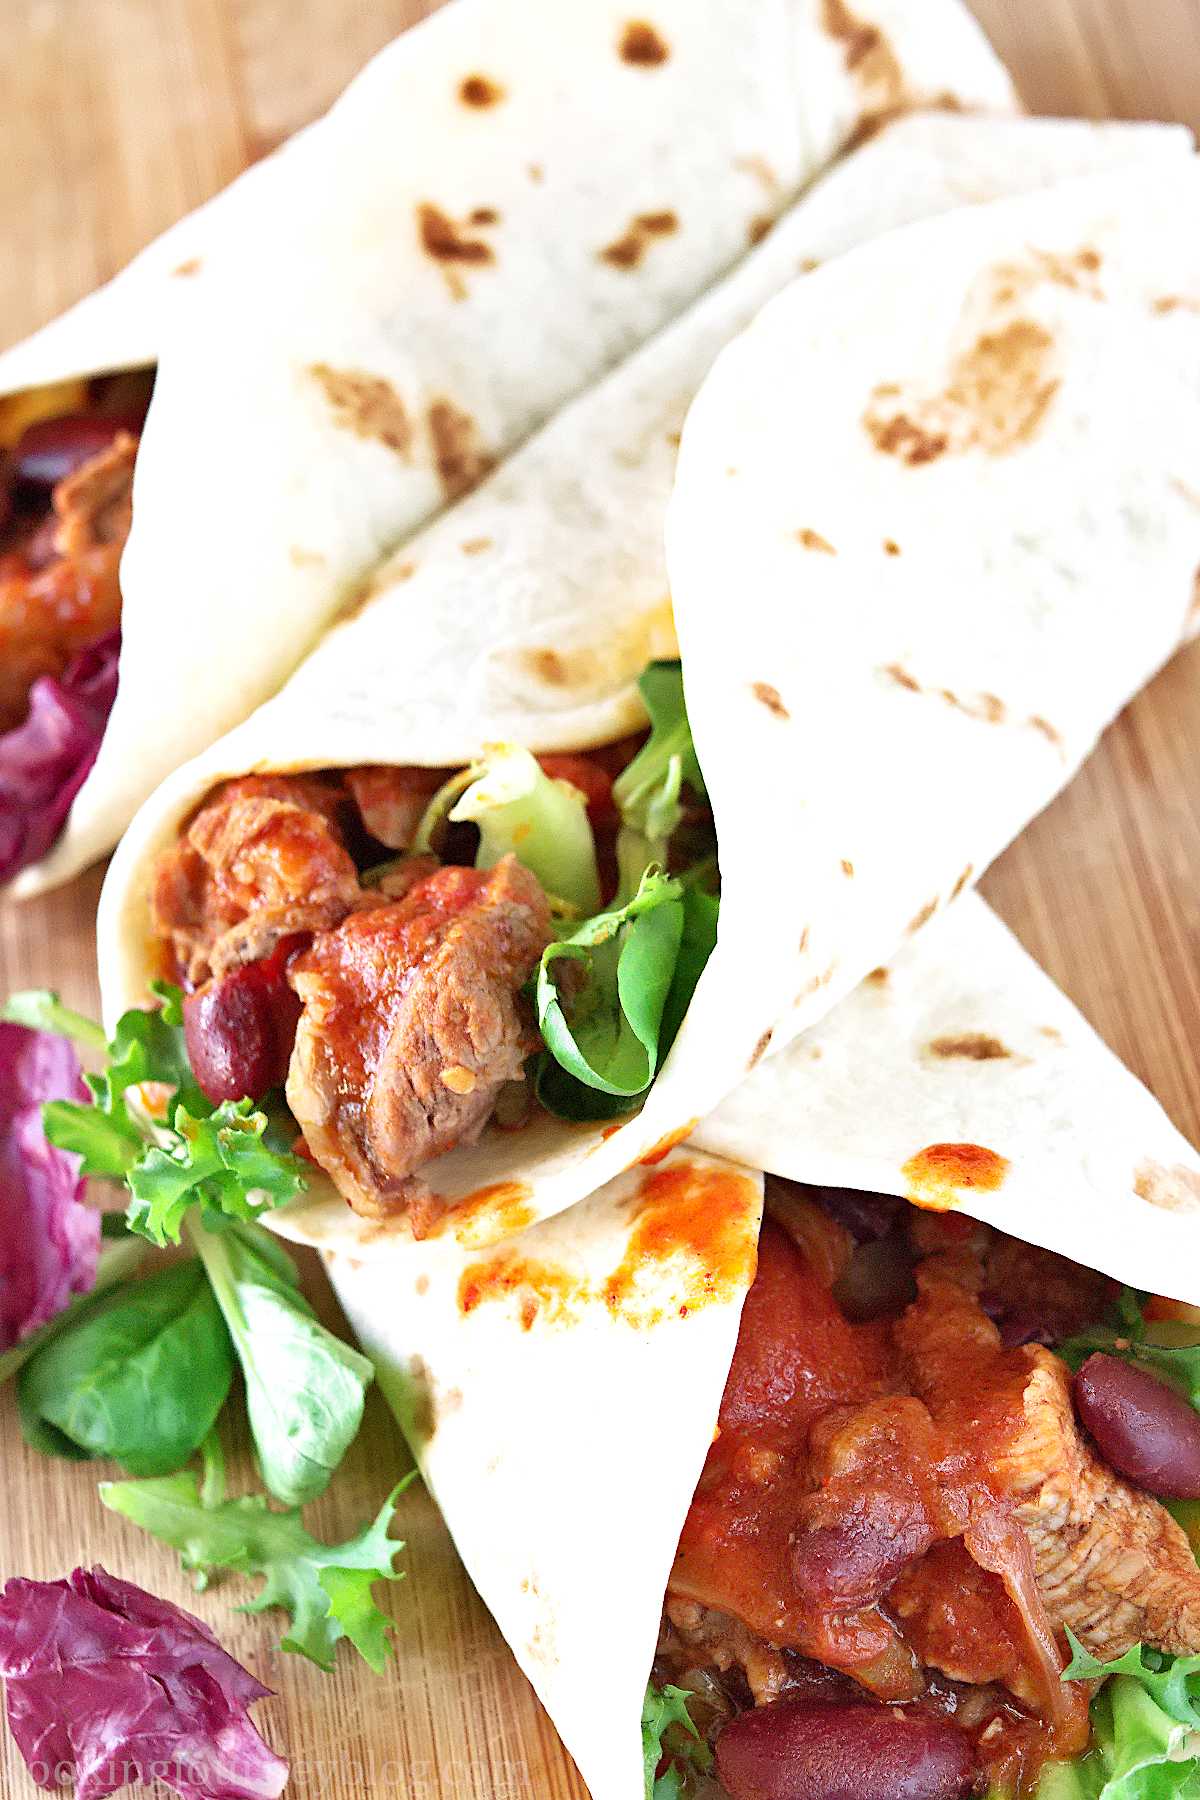 Tortilla wraps with turkey and beans - Turkey recipe - Cooking Journey Blog